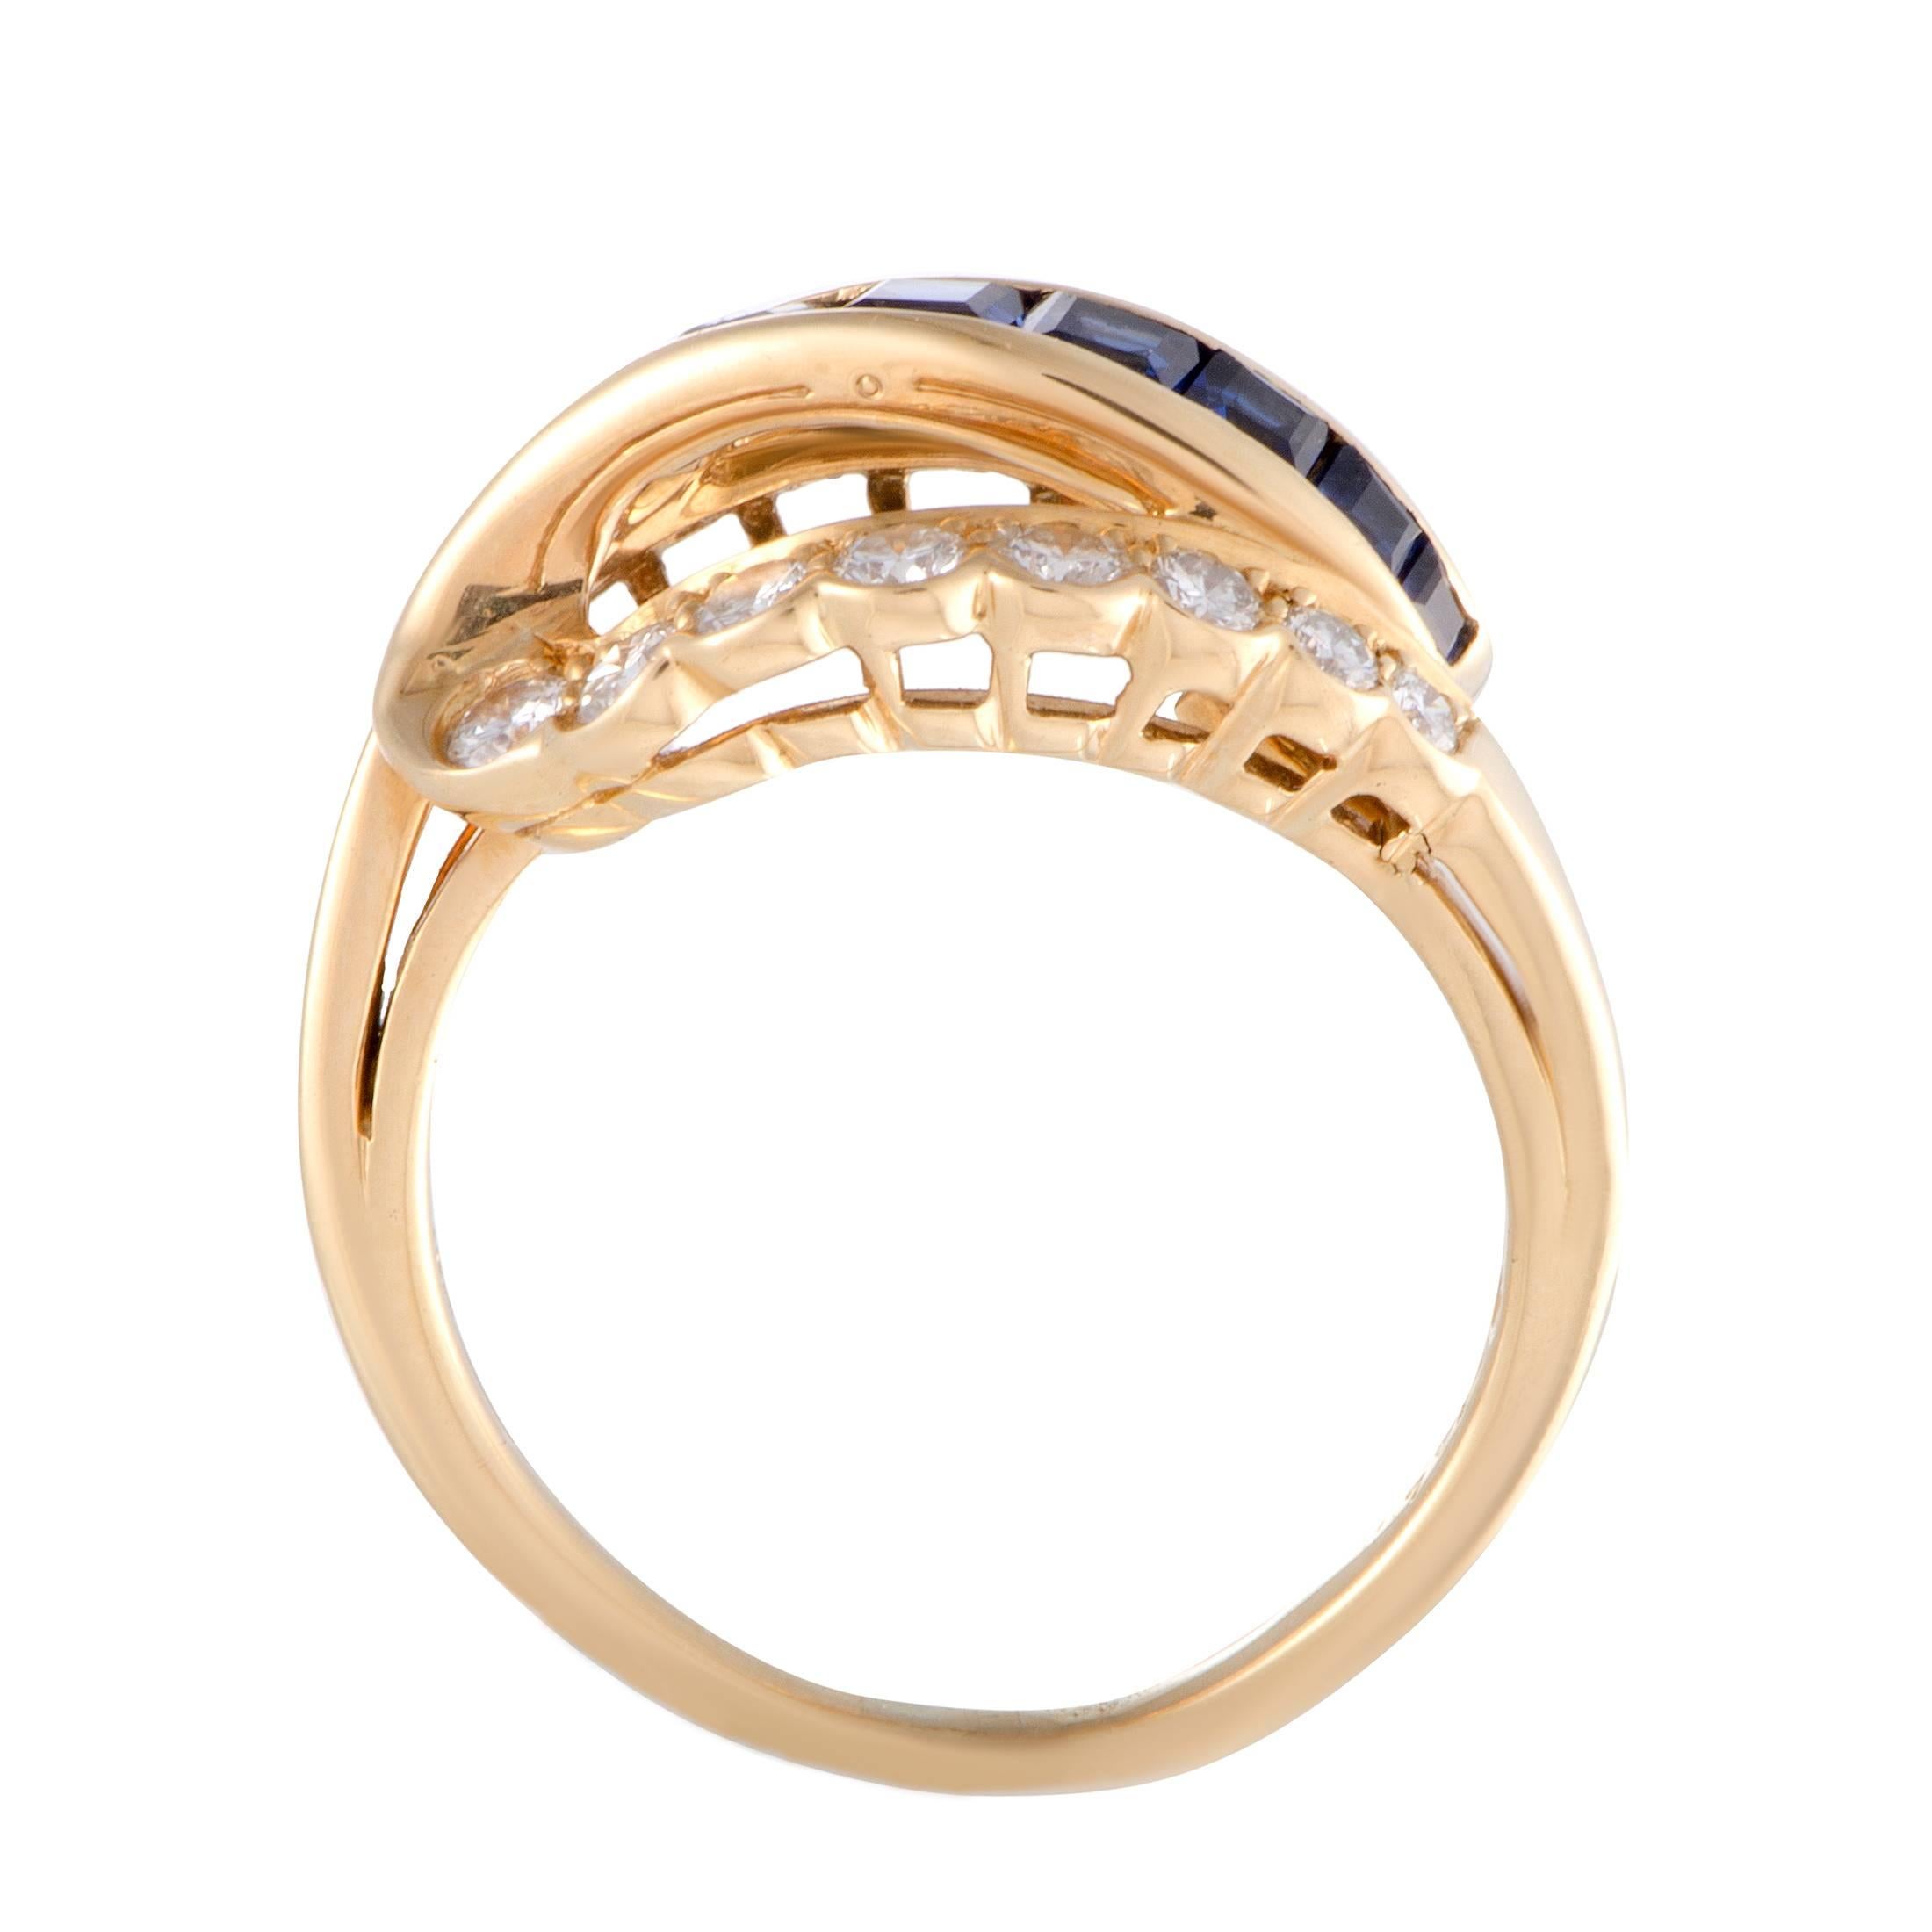 An endearingly refined appearance is achieved in this sublime Oscar Heyman ring by combining neat, classy design and tasteful décor. Made of 18K yellow gold, the ring is embellished with 0.75 carats of sapphires and approximately 0.65 carats of